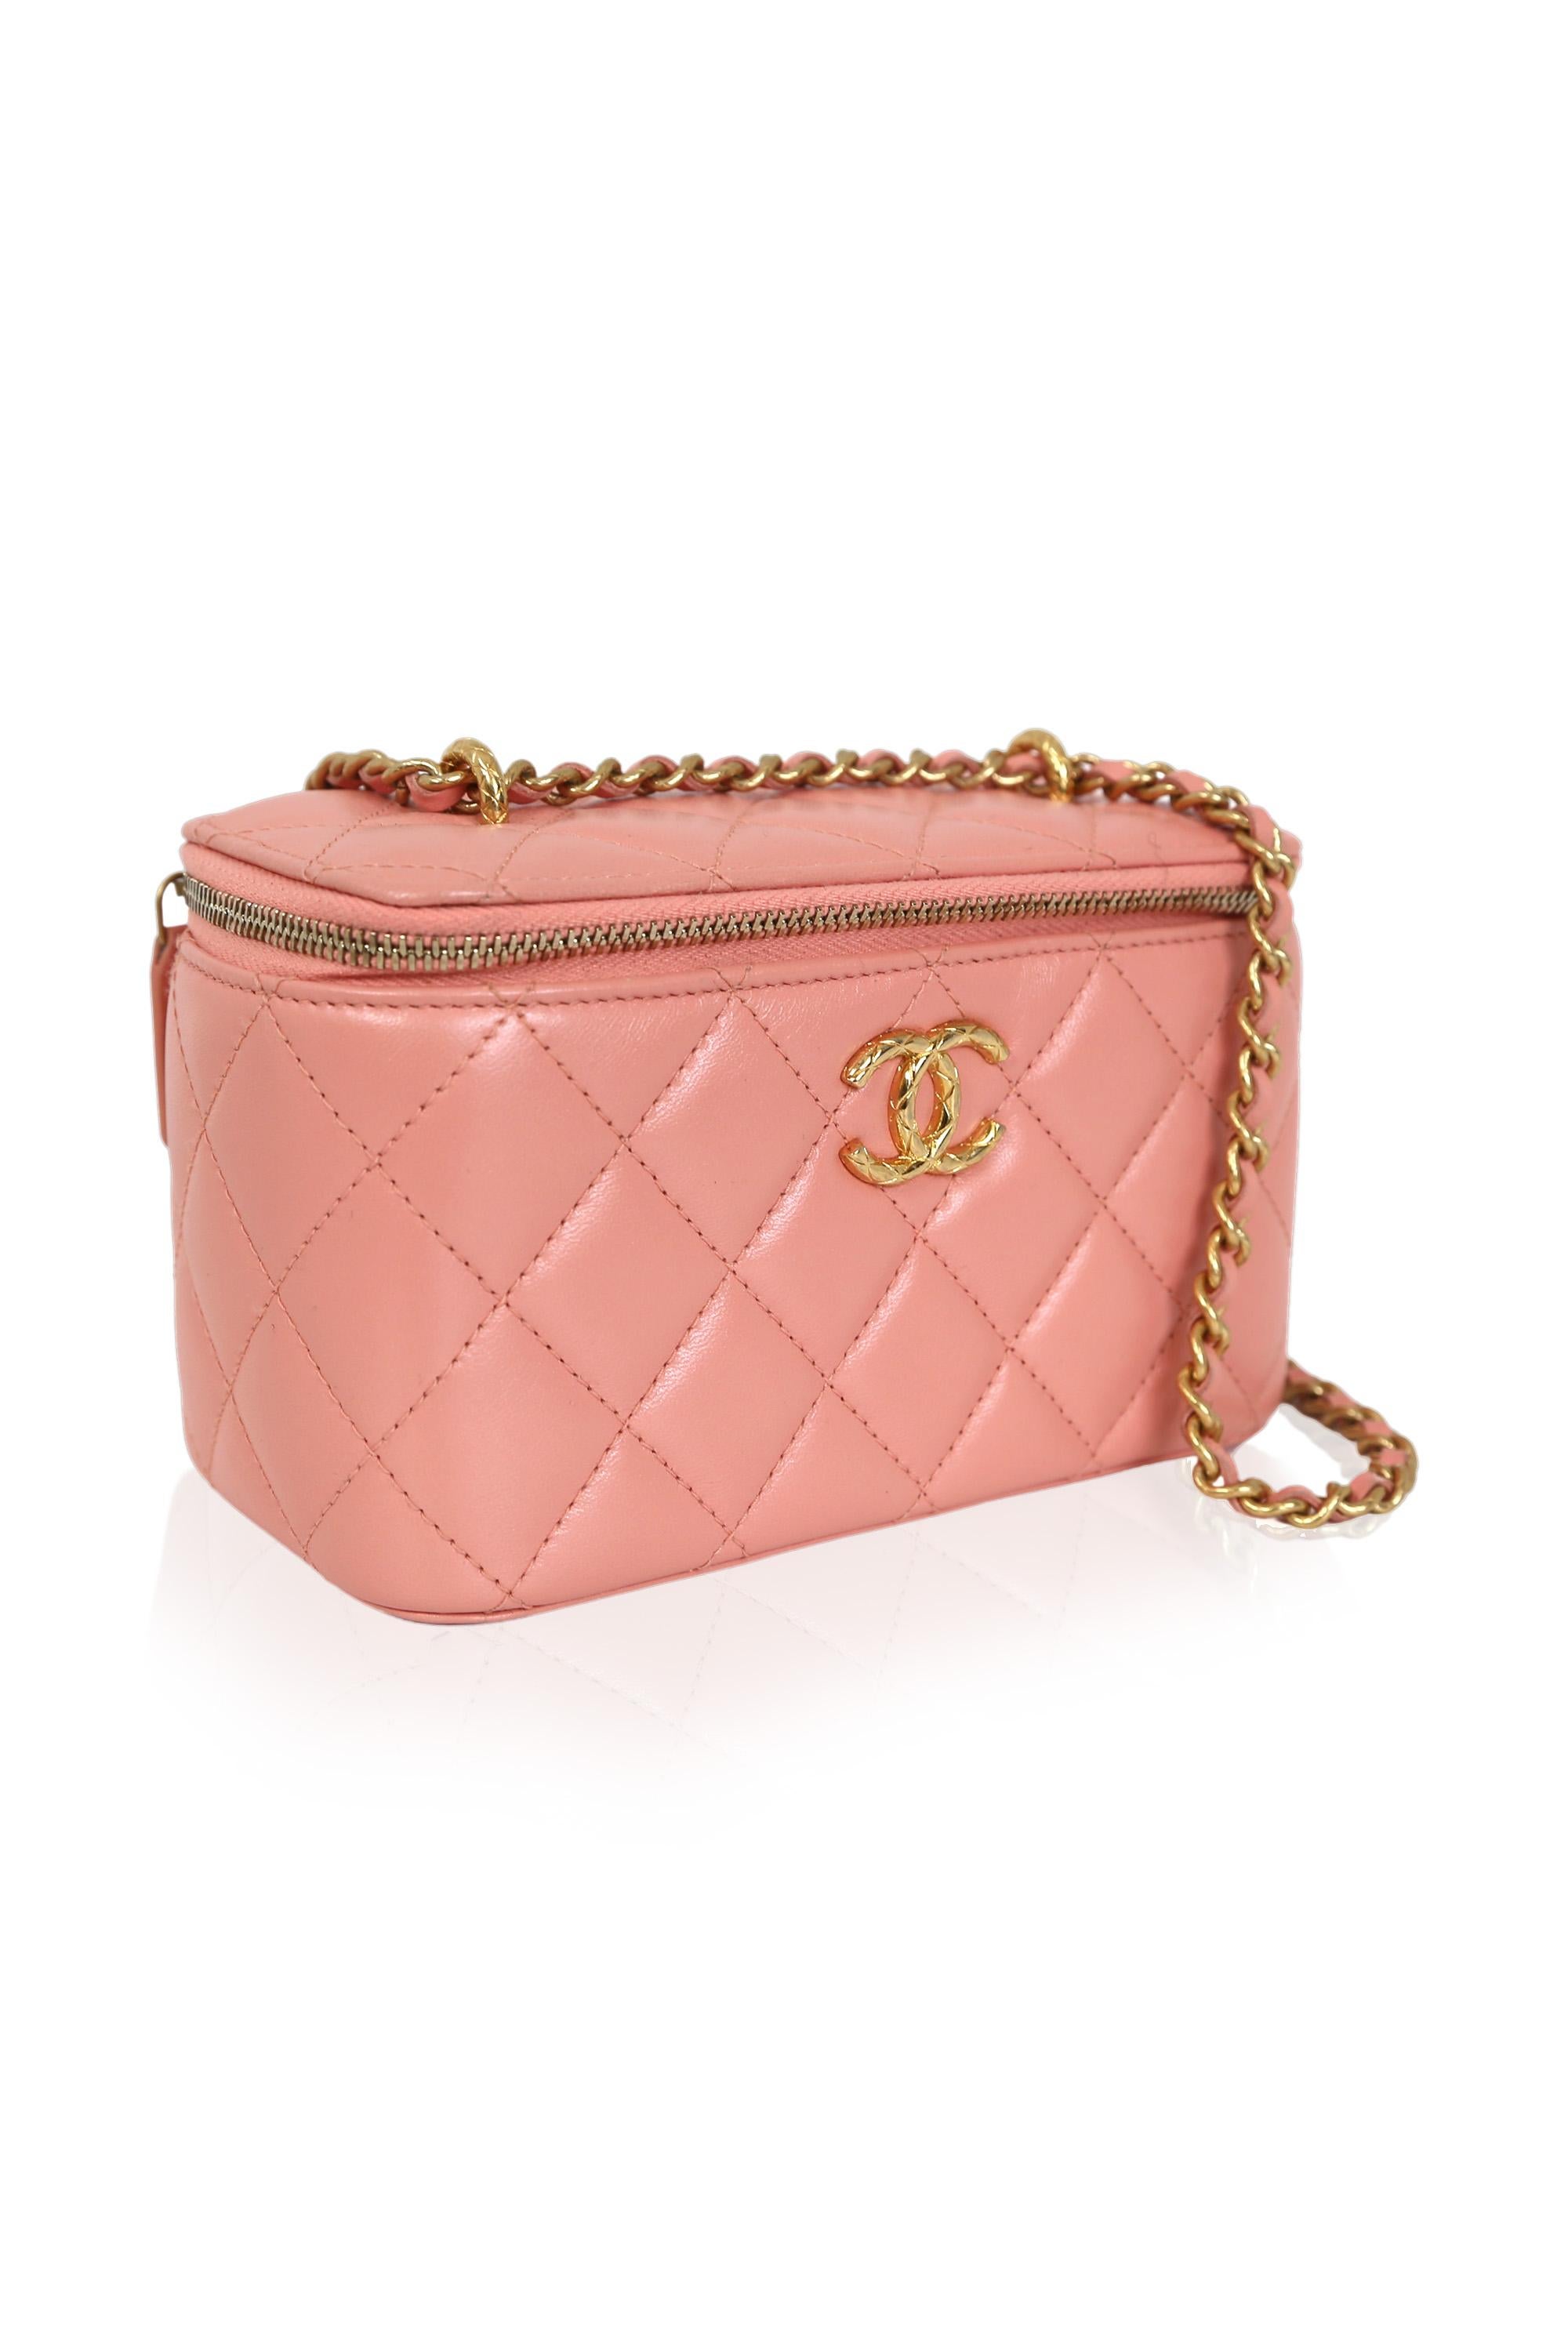 The Chanel Classique Vanity Case Medium Bag is a versatile and practical accessory suitable for any occasion. With enough space to store all daily essentials, it can be worn comfortably on the shoulder or crossbody for convenience.

*Quilted-grained